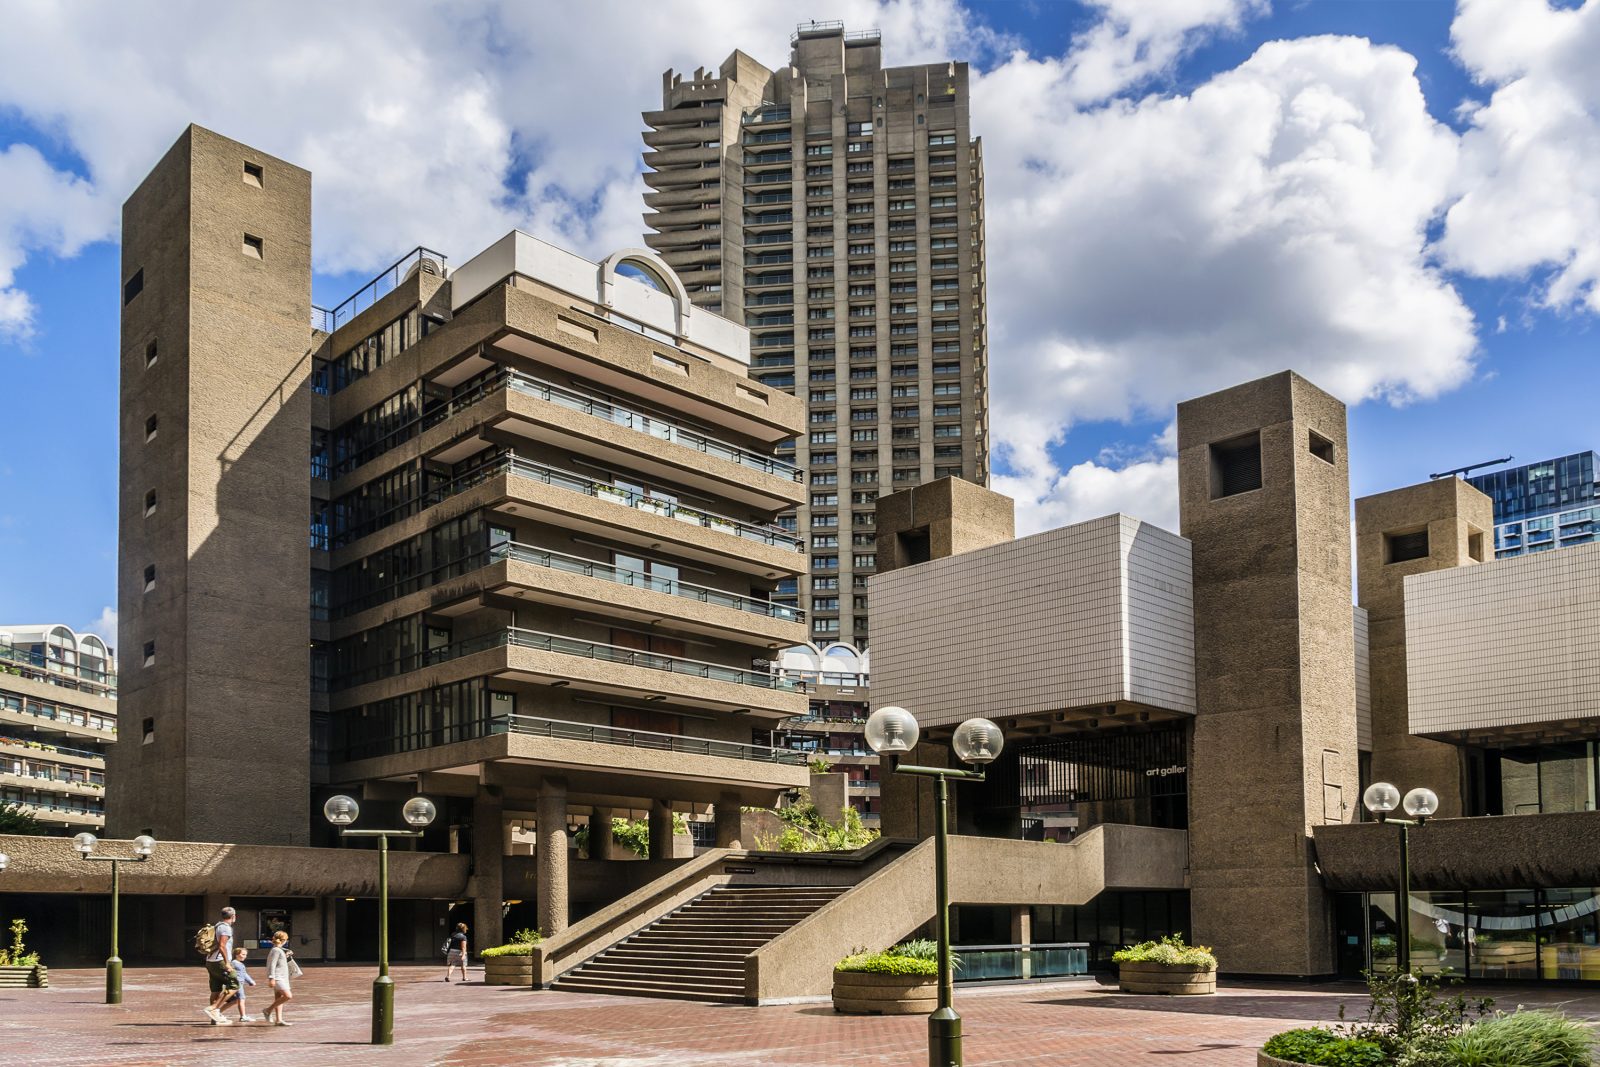 Architecture Building Block Of Flats Brutalism London Barbican UK Street Light Stairs Lamp Concrete 1600x1067